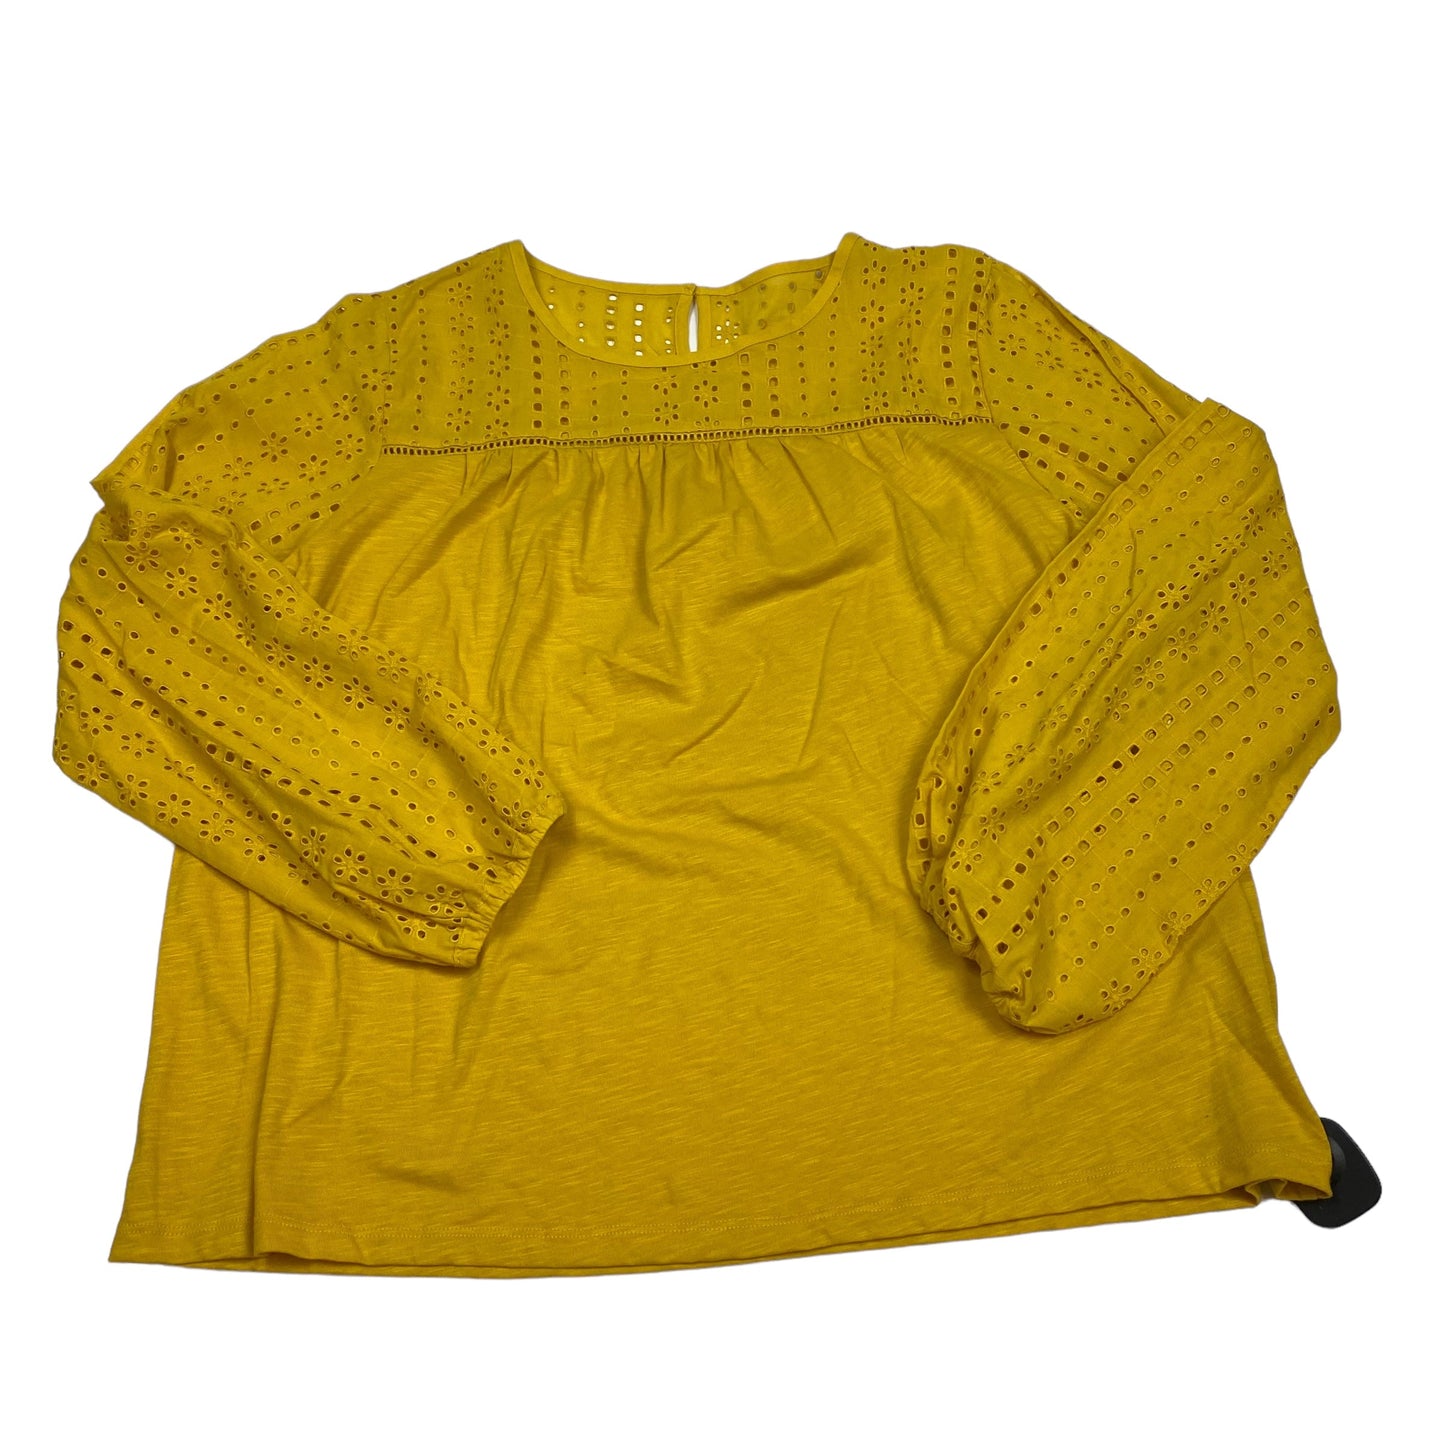 Yellow Top Long Sleeve St Johns Bay, Size Xl